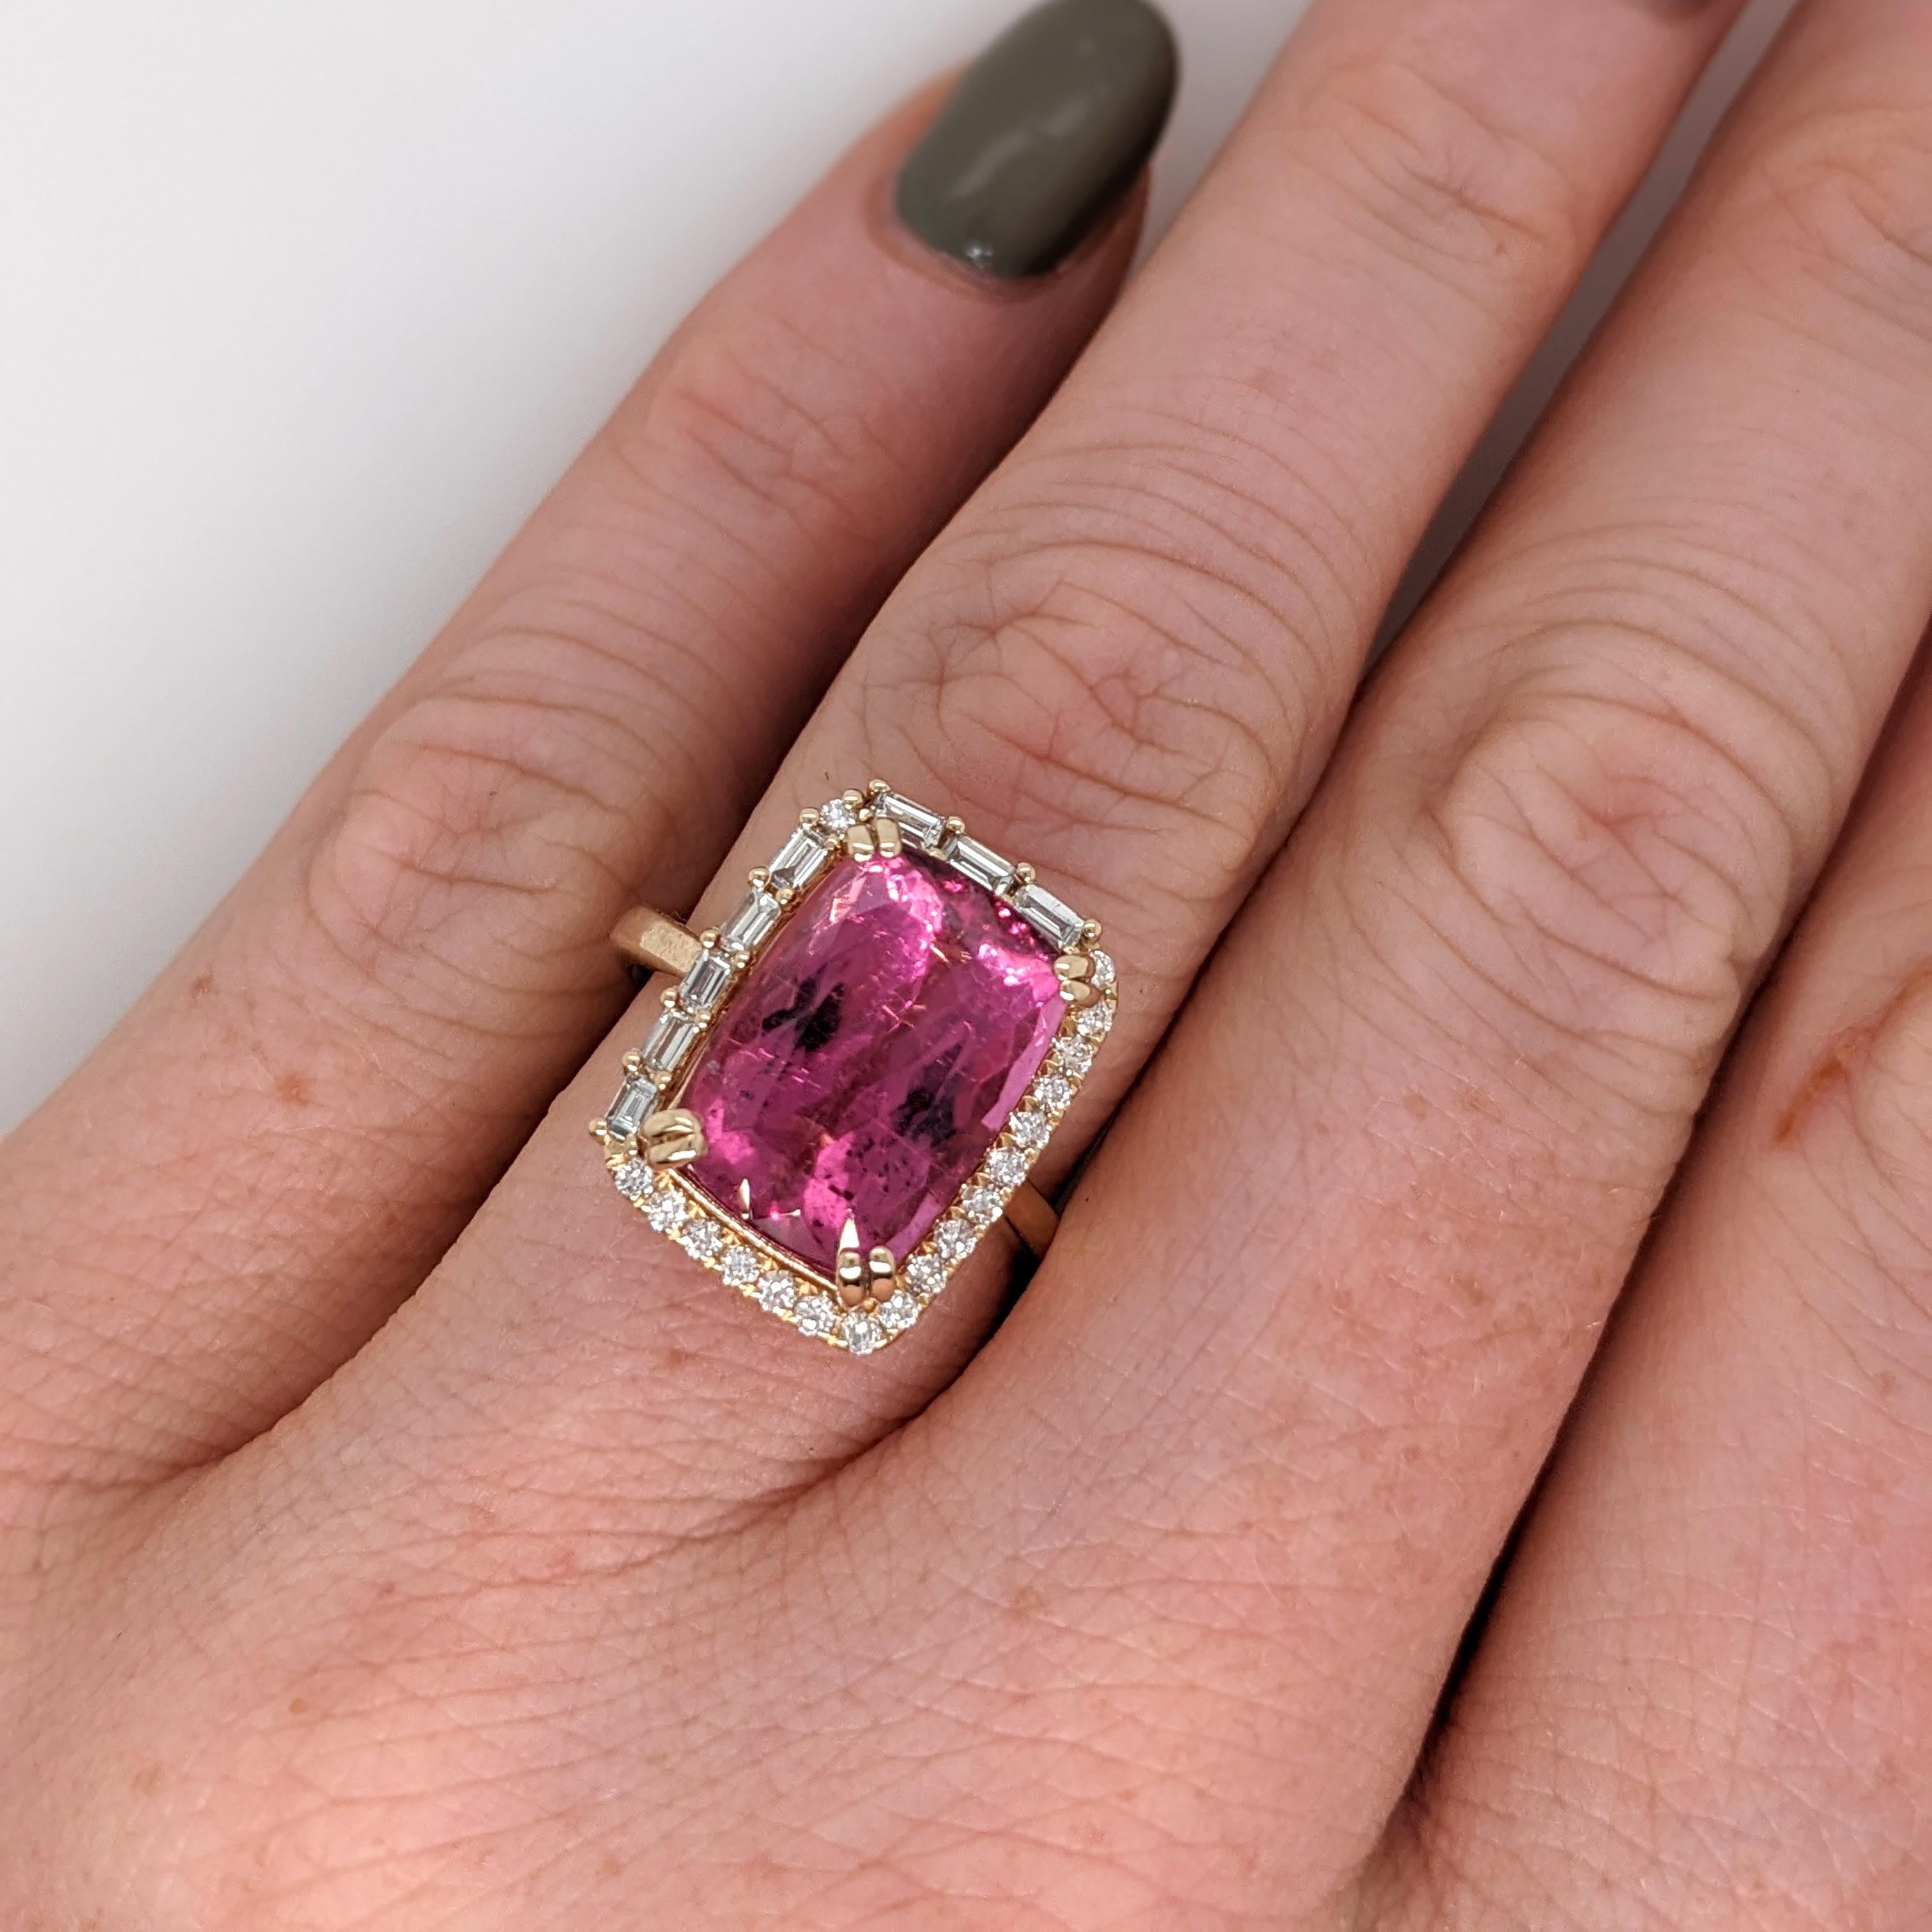 5.7ct Pink Tourmaline Ring w Earth Mined Diamonds in Solid 14K Gold CU 13x9mm